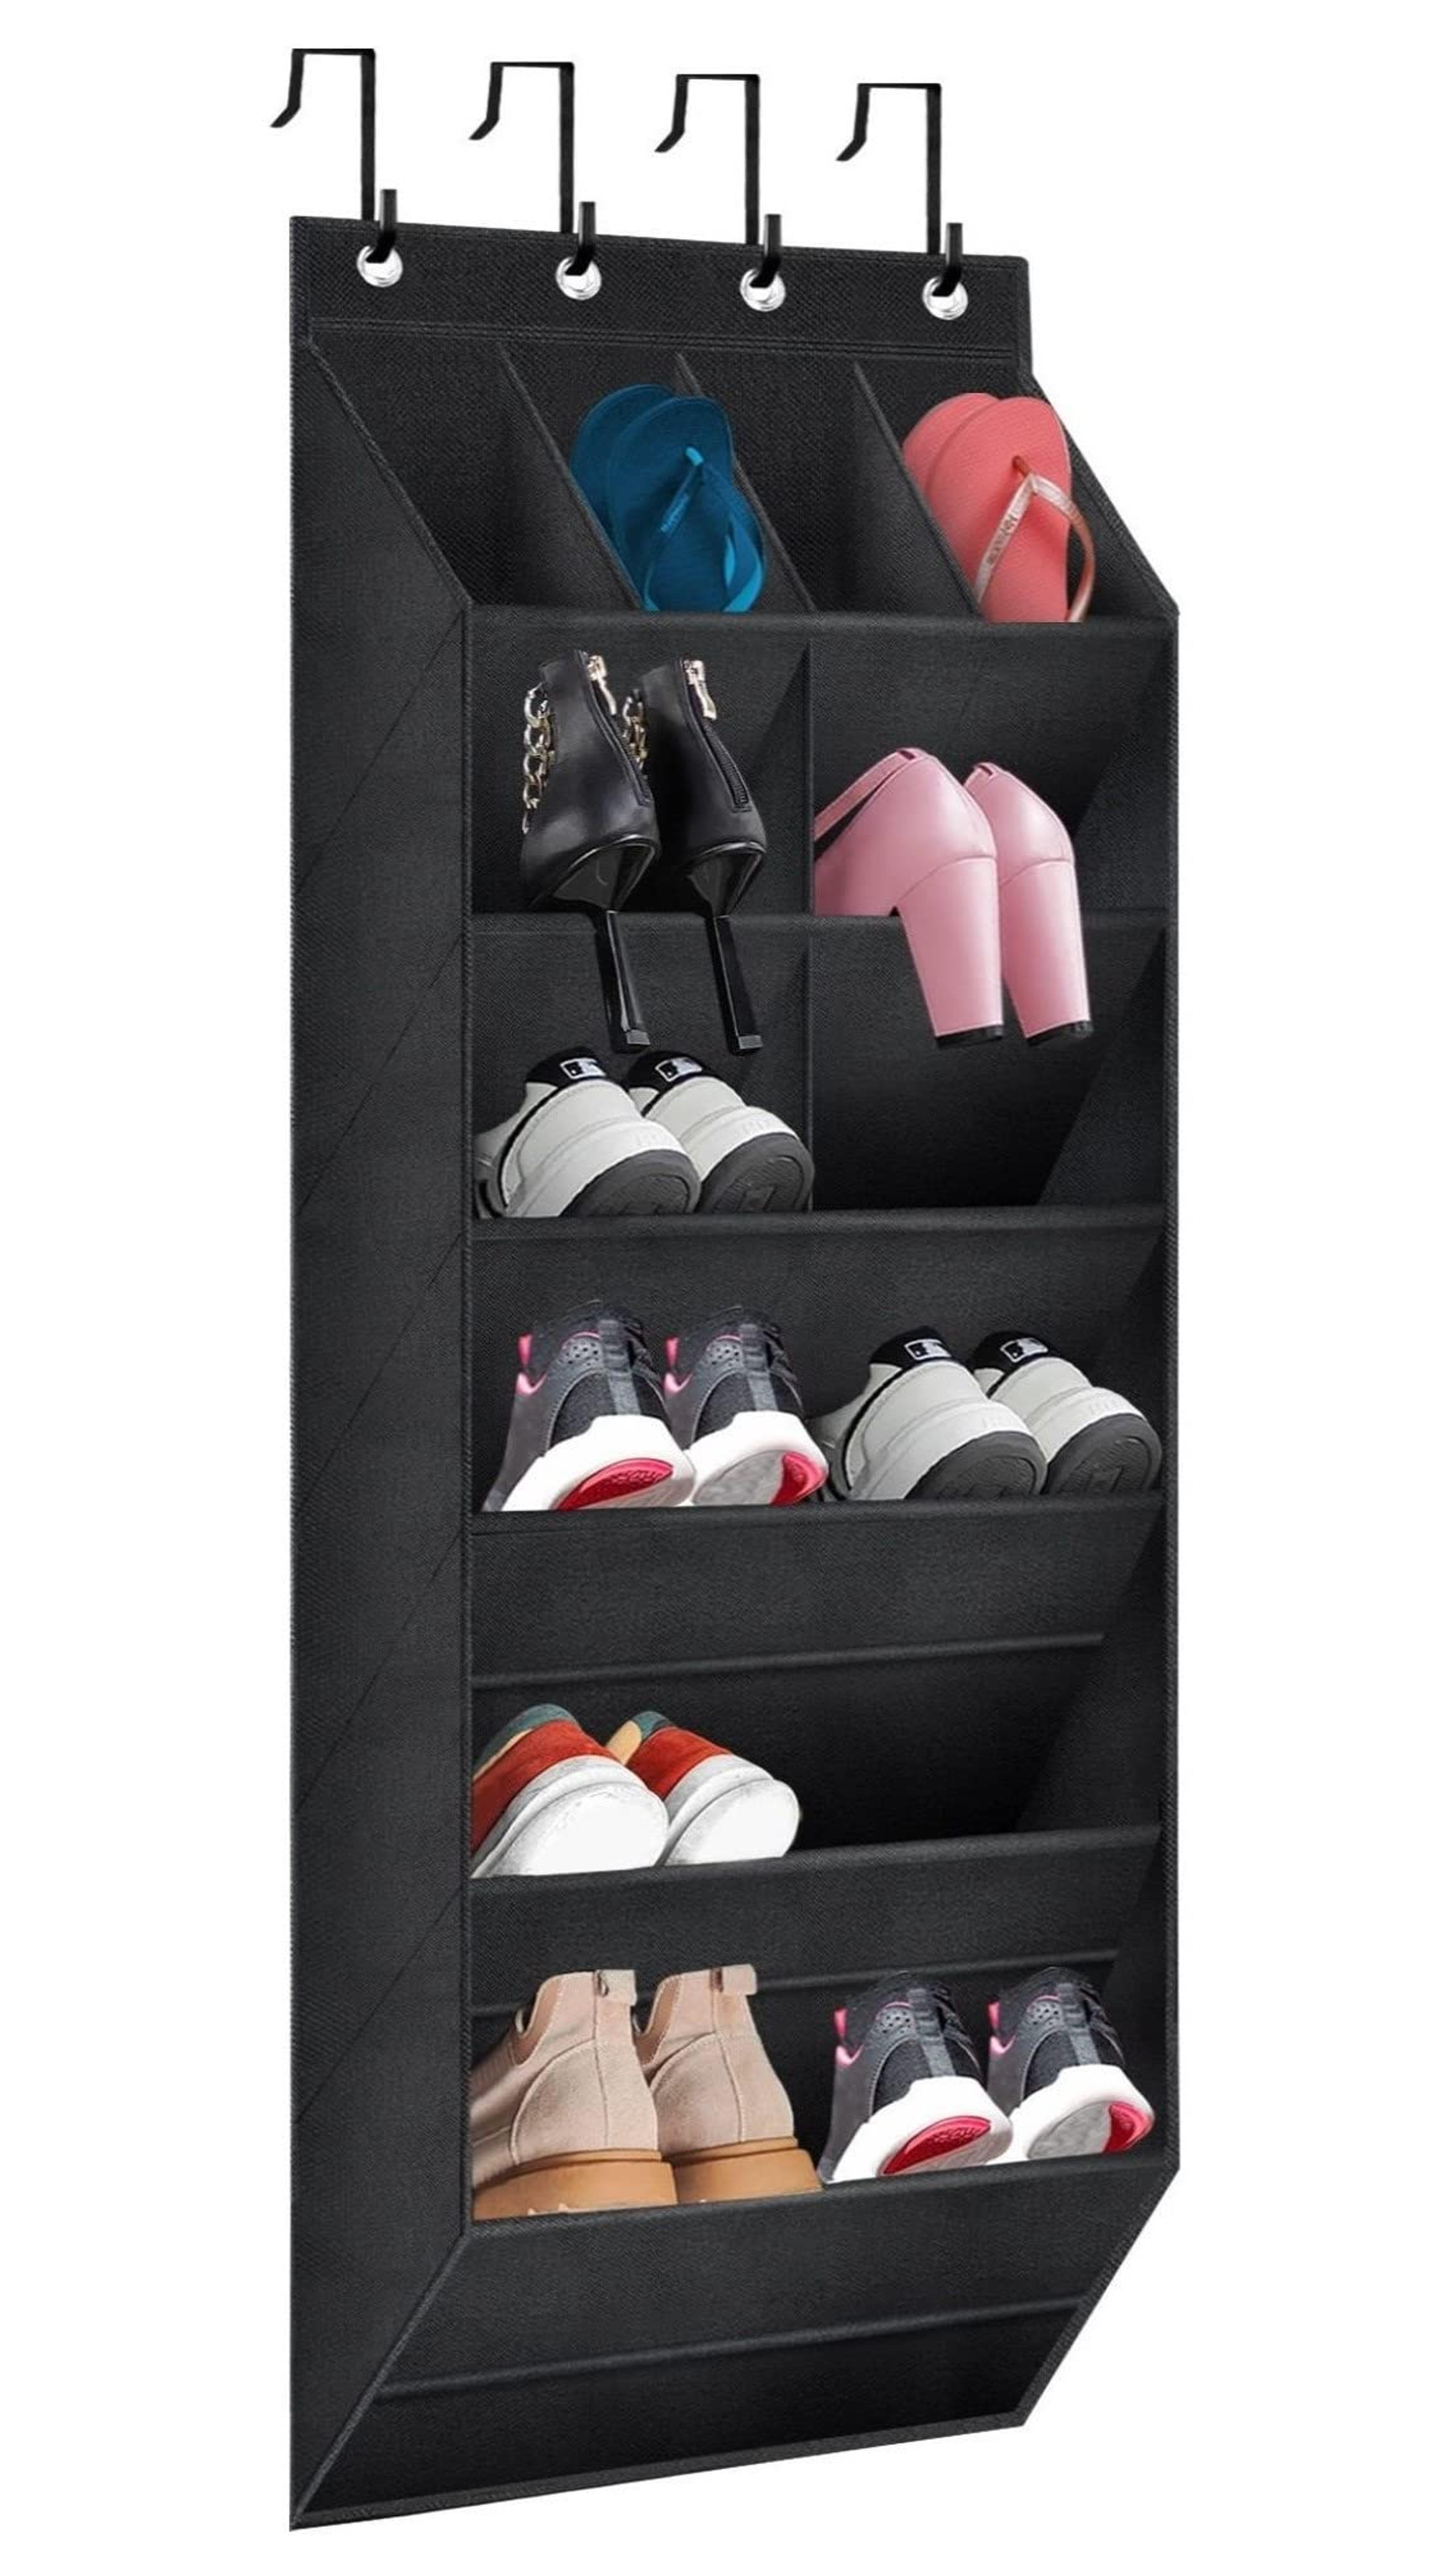 Amazon.com: TIOYOTY Over The Door Shoe Organizer, 2 Pack Hanging Organizer with Large Deep Pockets, Rack for Closet and Dorm Narrow Door, Holder Black : Home & Kitchen